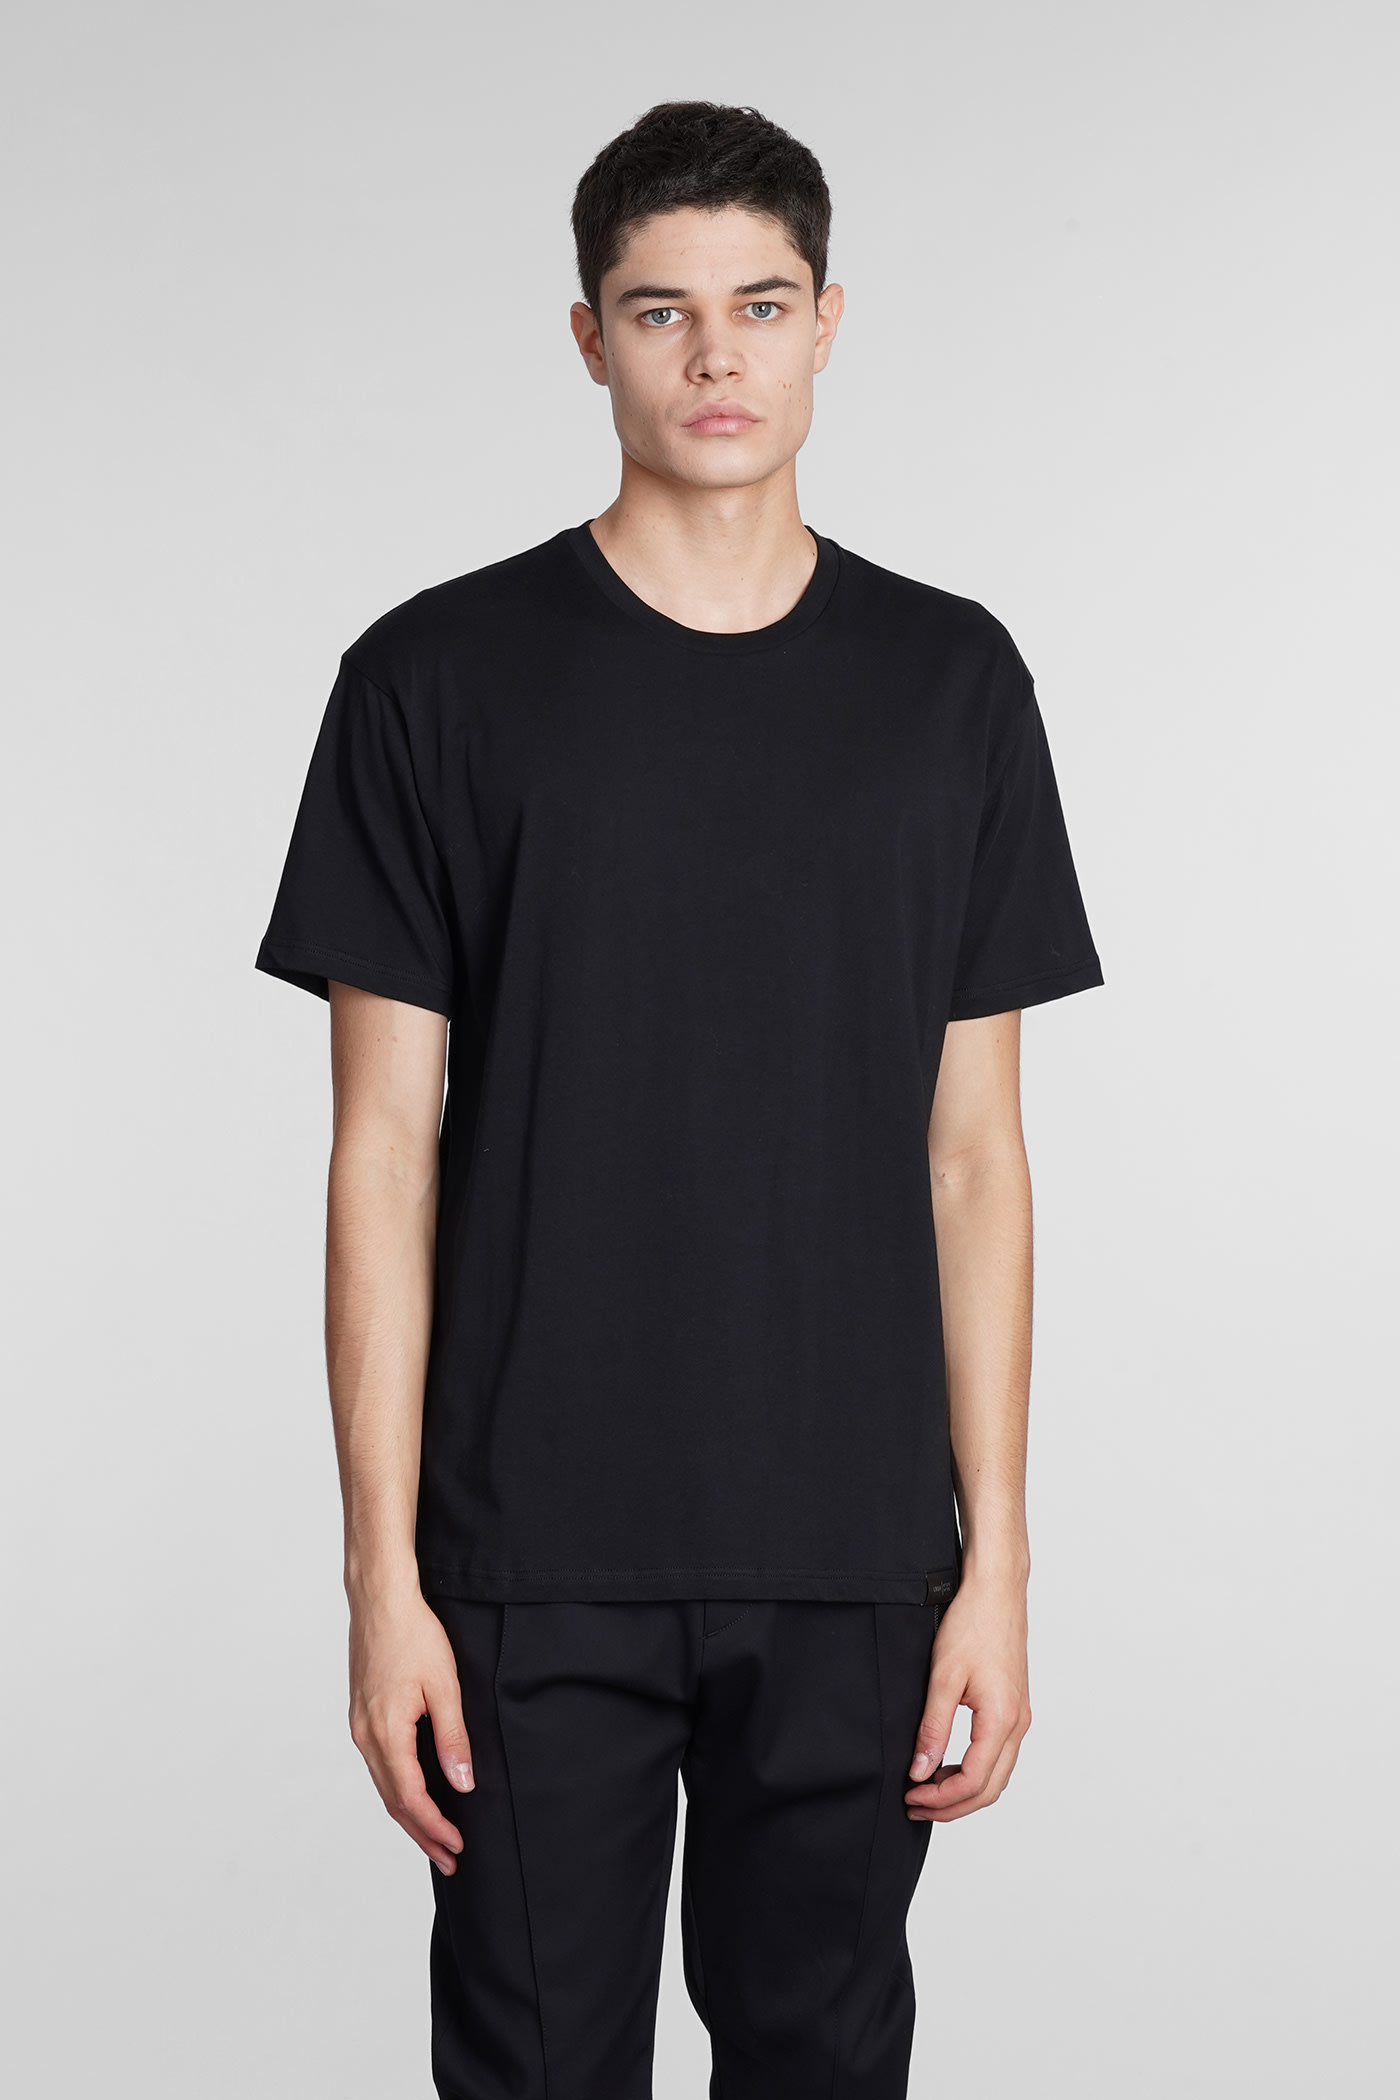 Low Brand t-shirt in black jersey